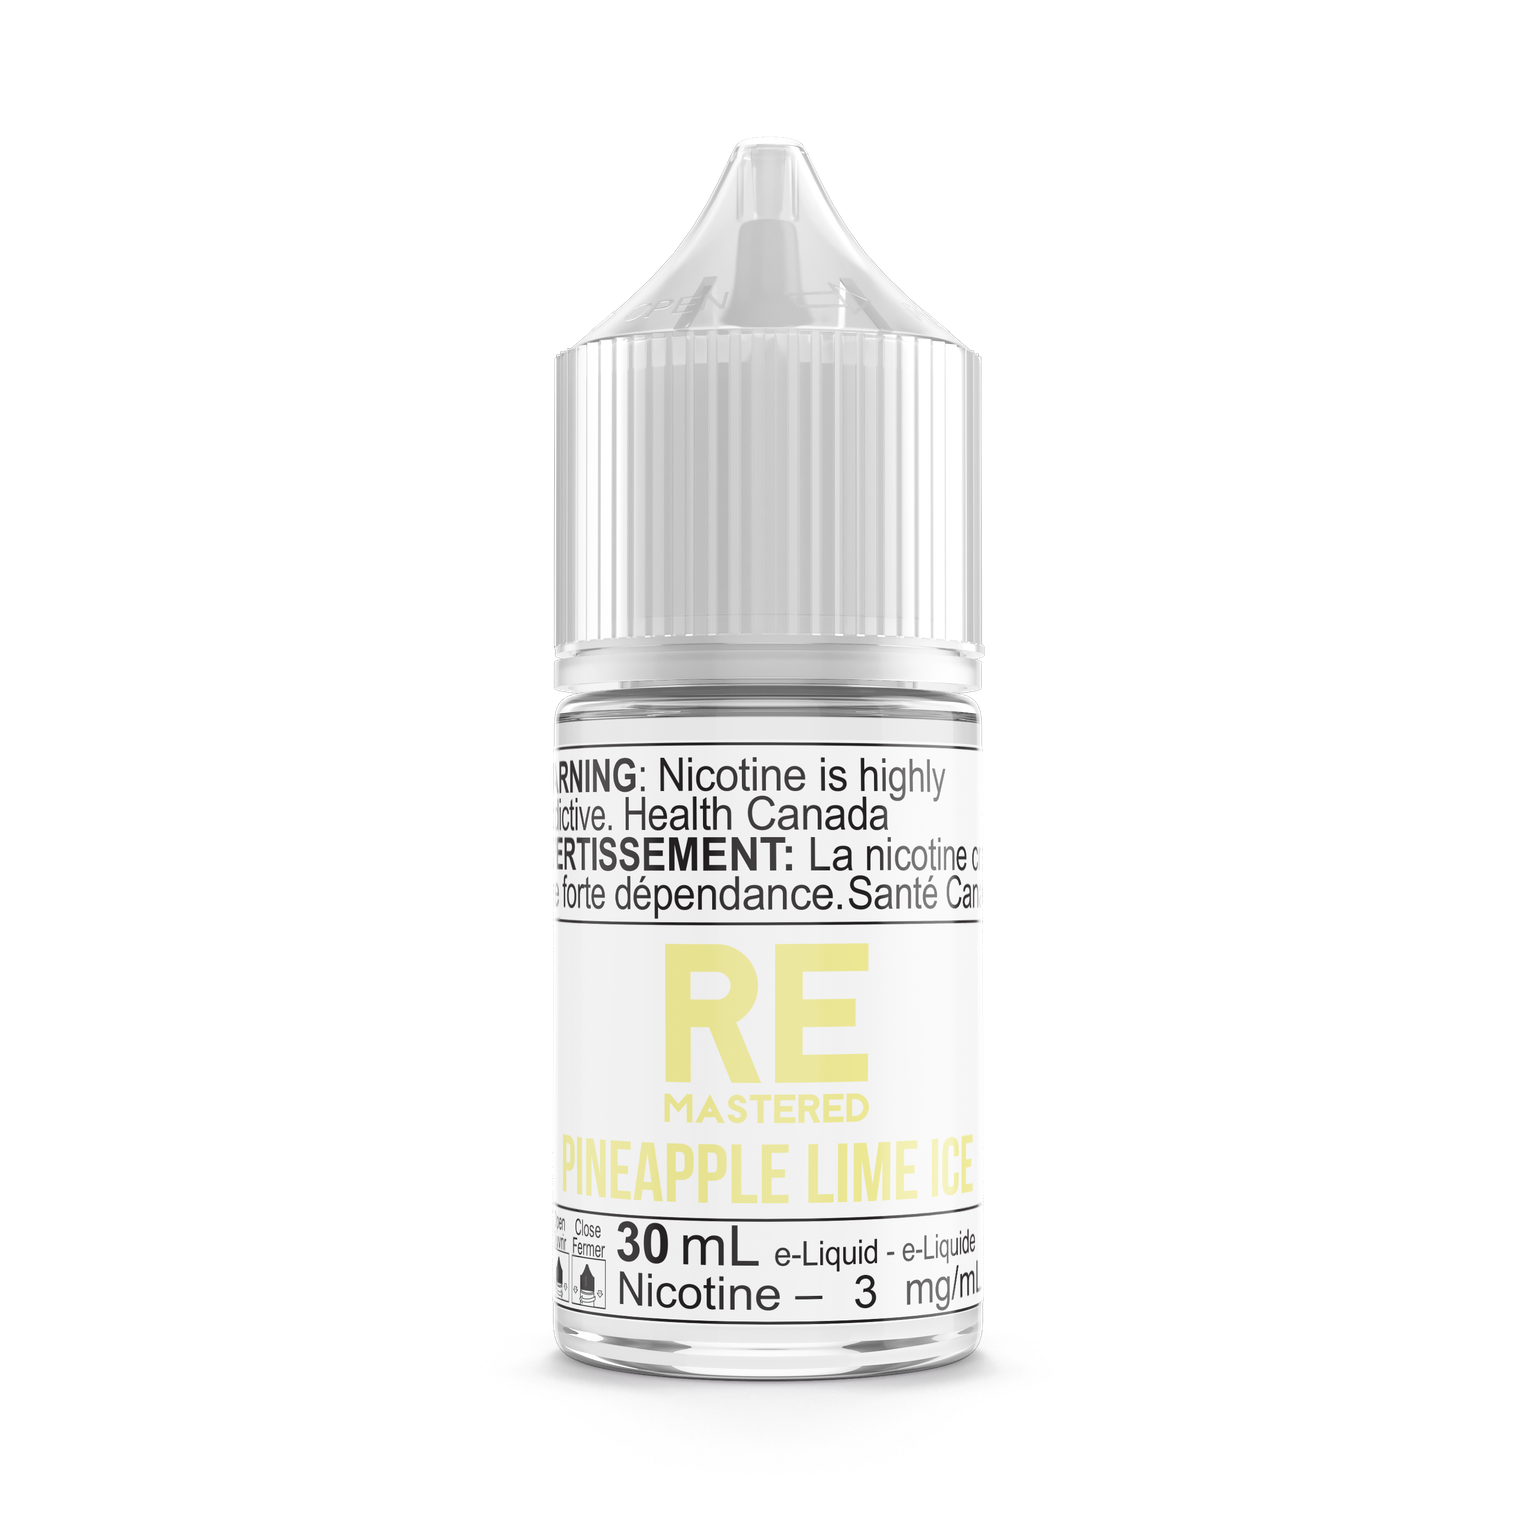 PINEAPPLE LIME ICE BY REMASTERED - 30 ML